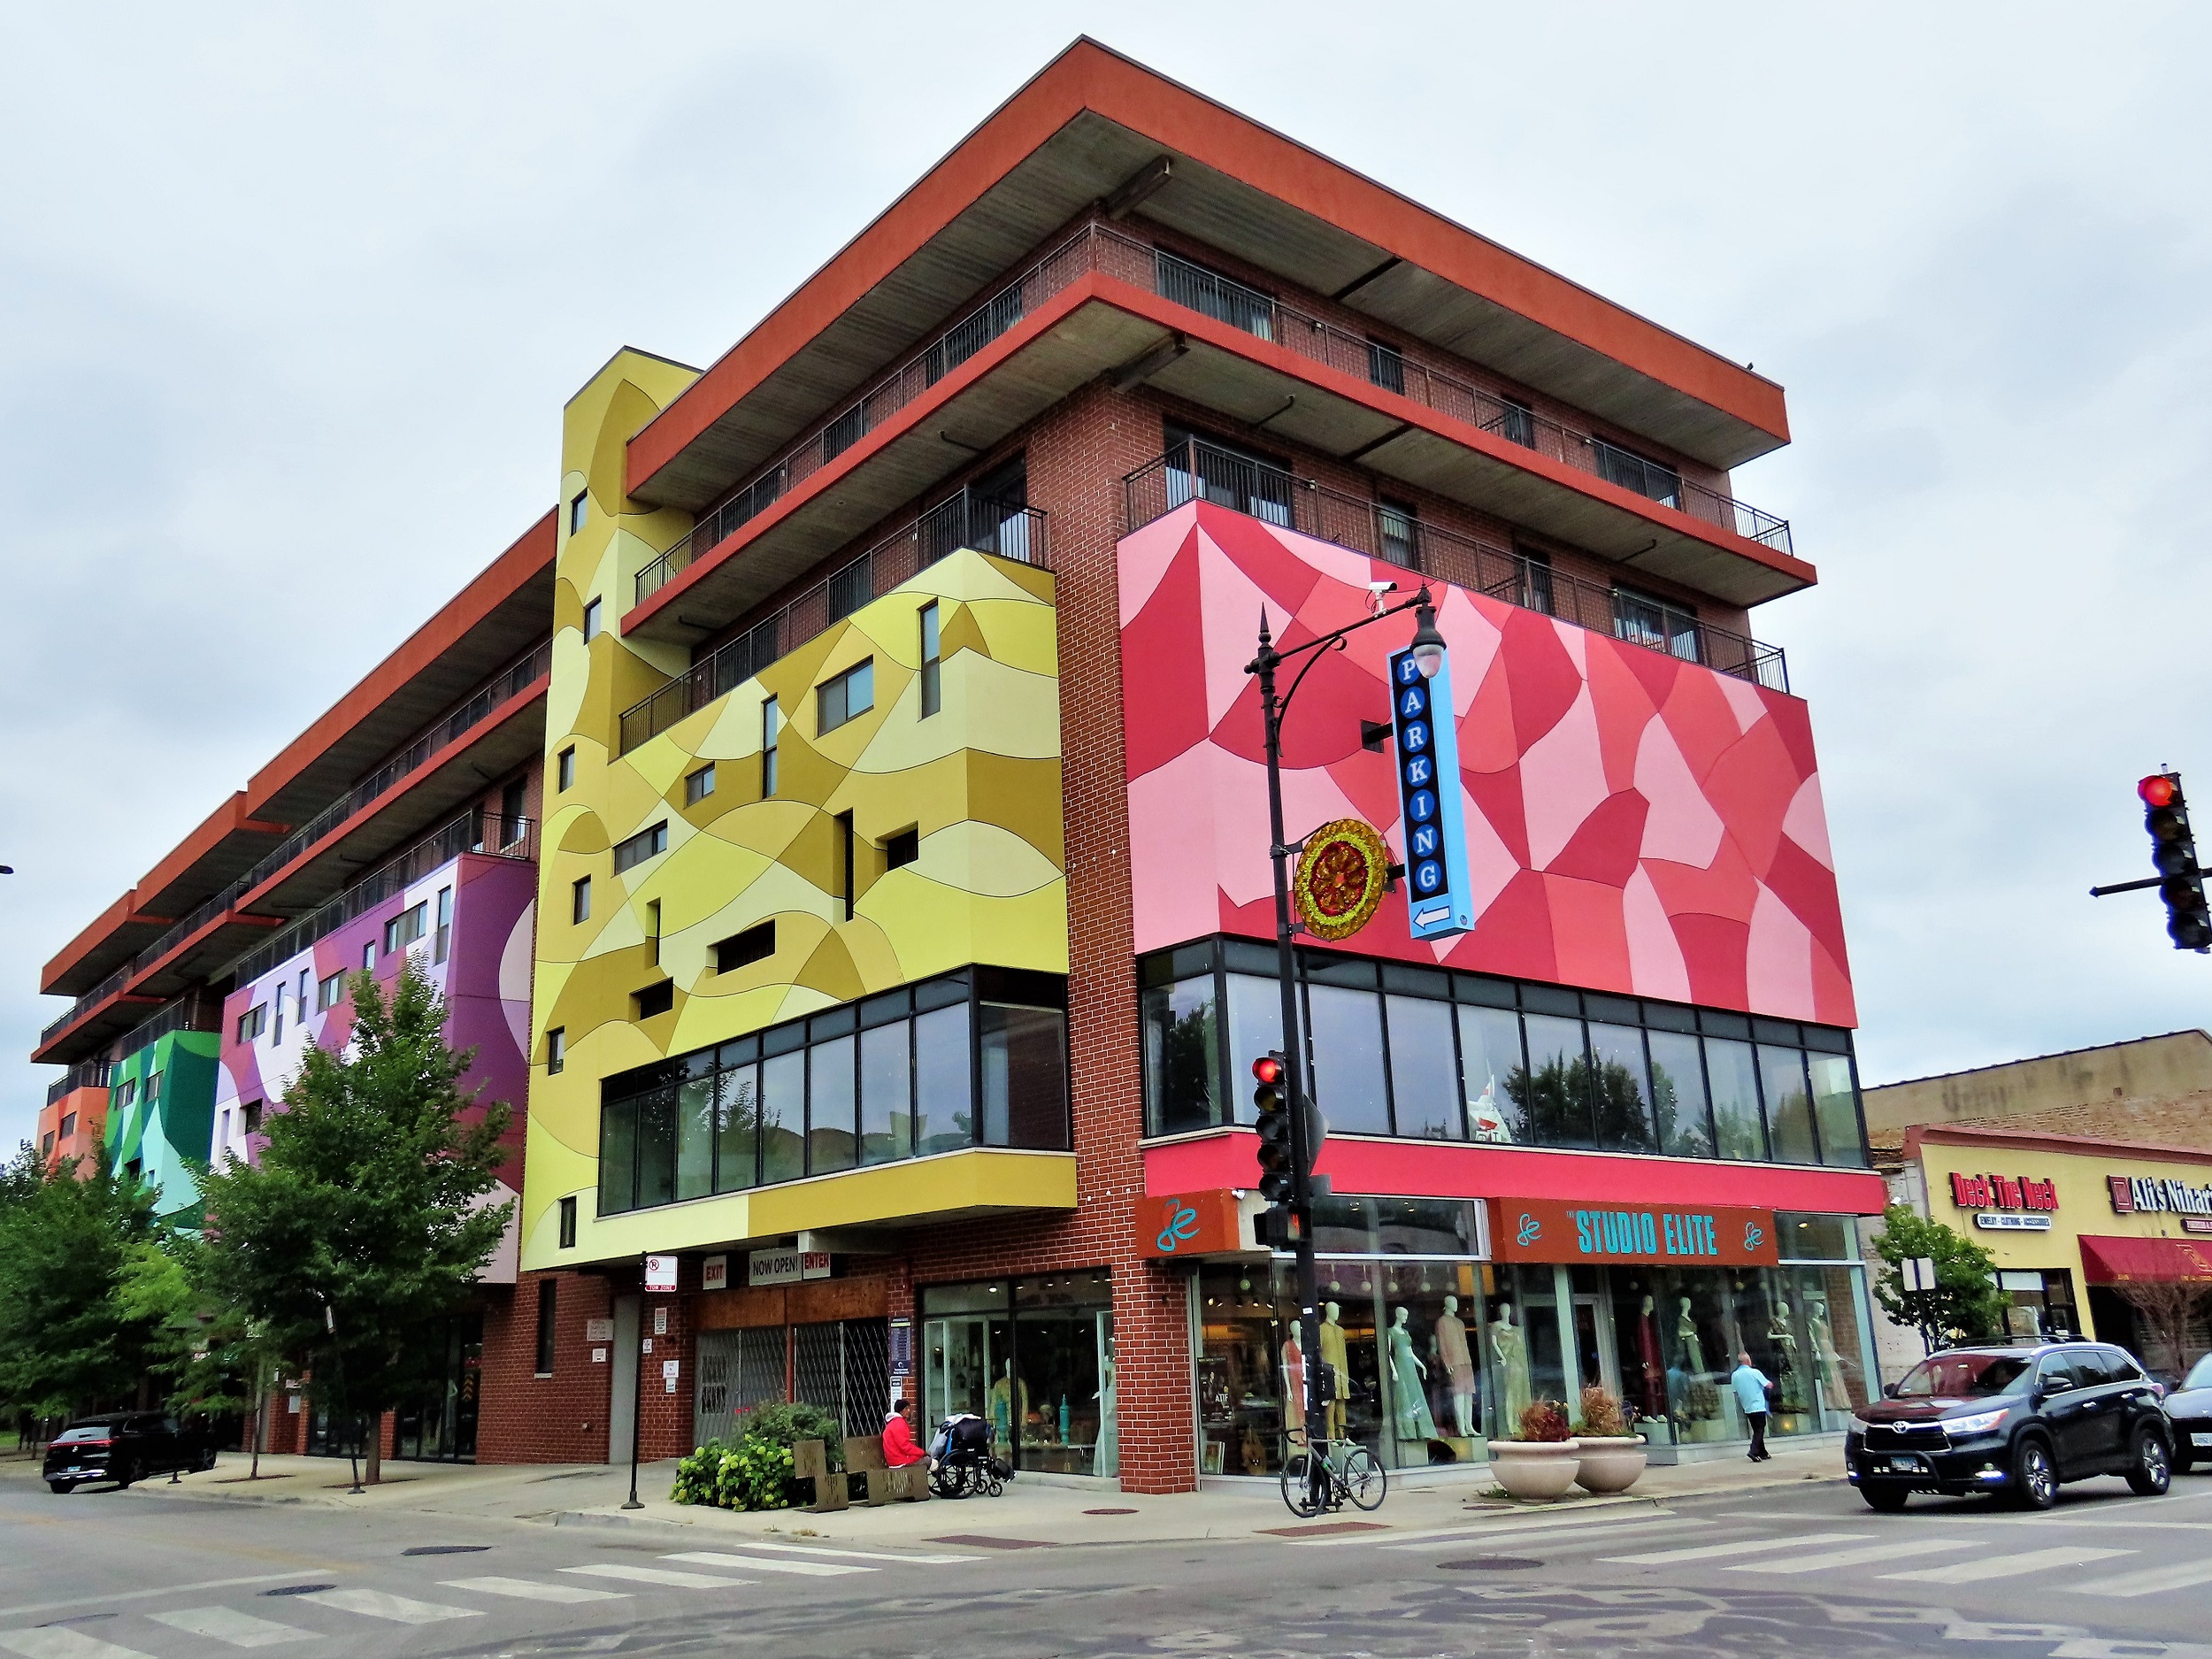 A tour bike leaning on a light post at the corner of a six story double lot flat roof red brick storefront and above parking with colorful geometric murals.